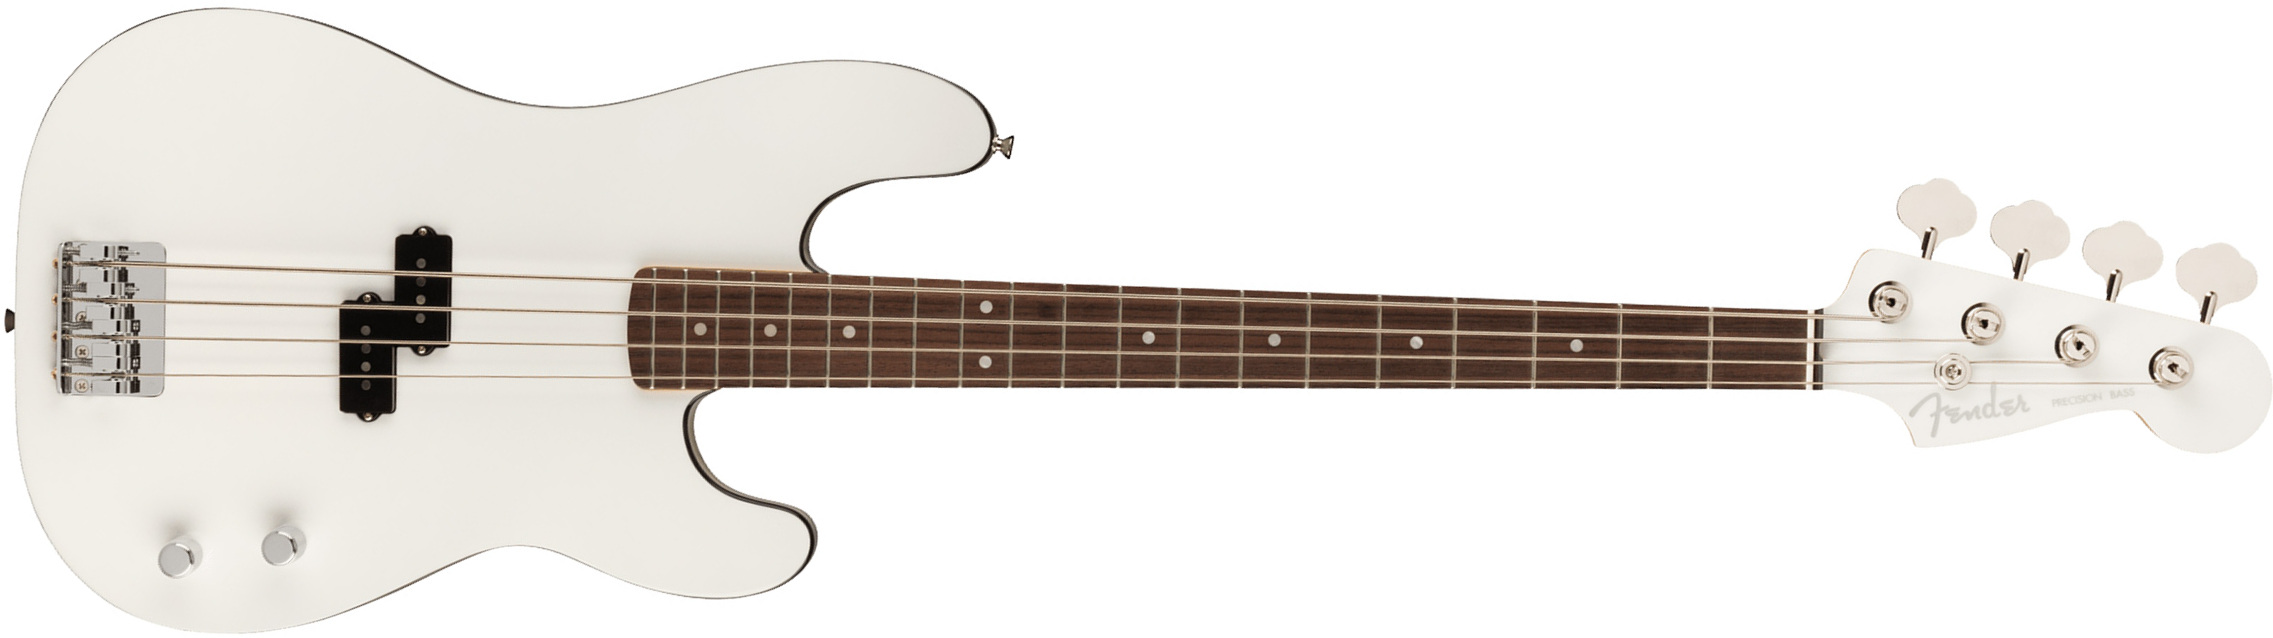 Fender Precision Bass Aerodyne Special Jap Rw - Bright White - Basse Électrique Solid Body - Main picture